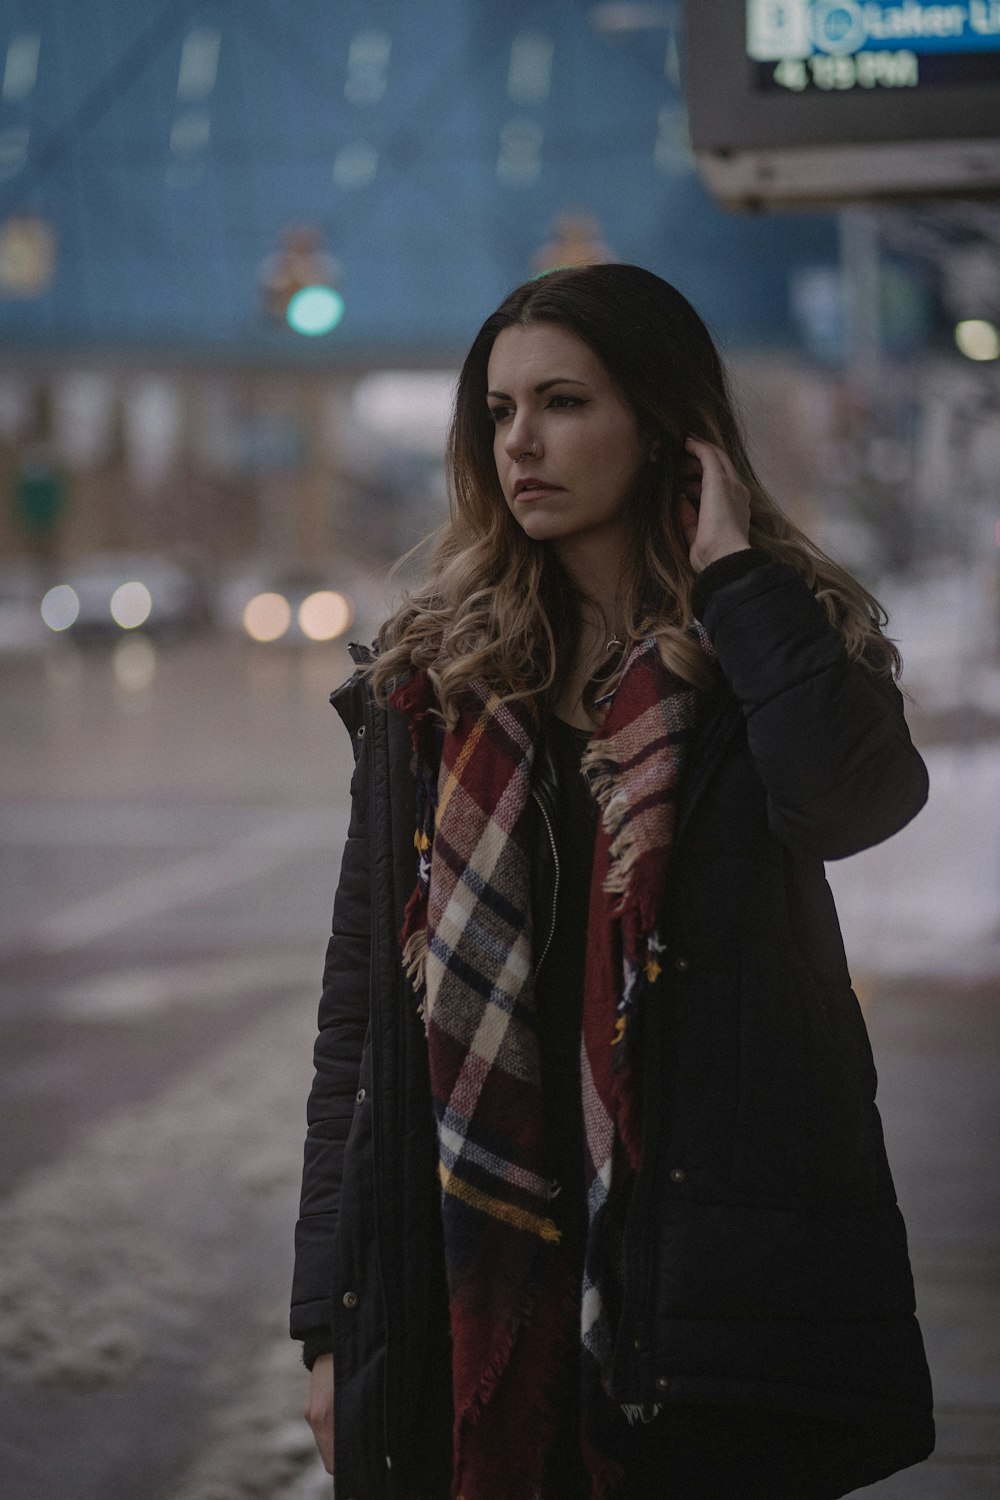 woman in black jacket standing on road during night time